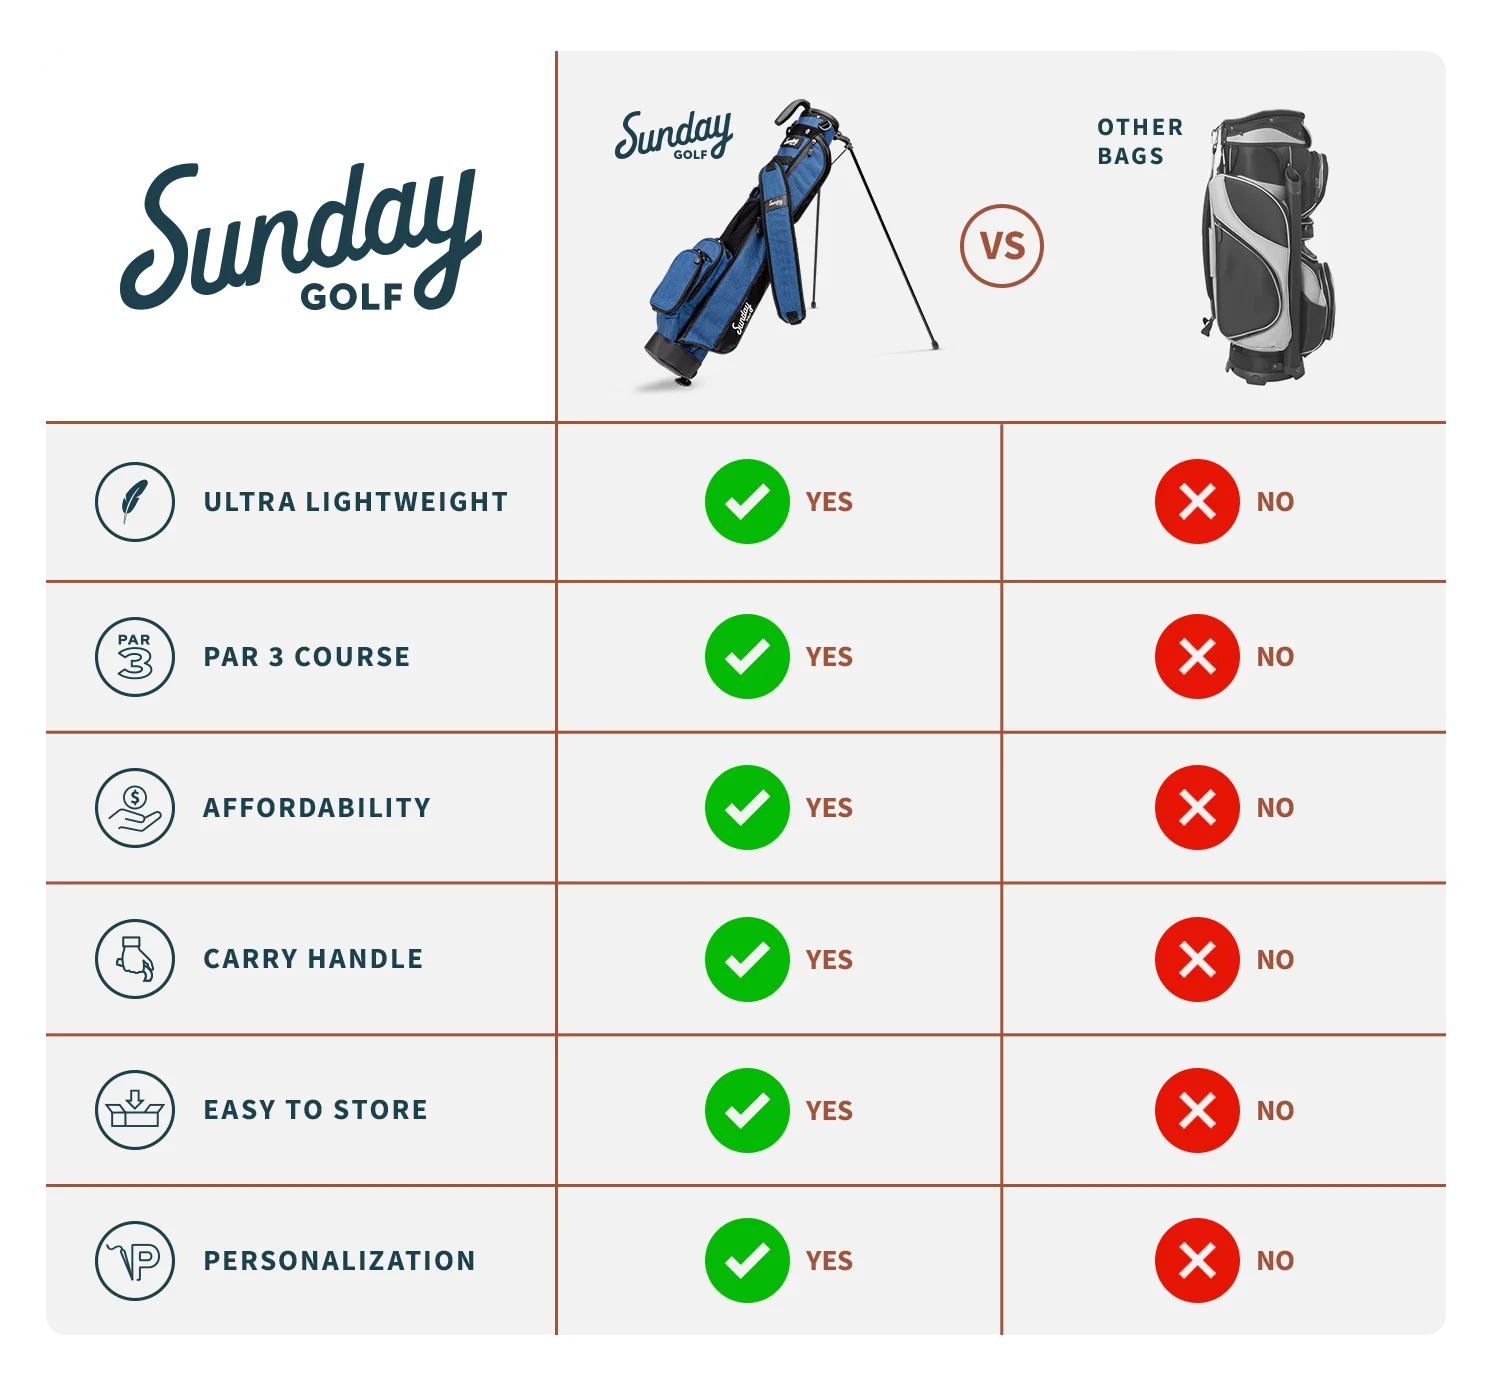 Comparison of Sunday Golf Loma vs other bags